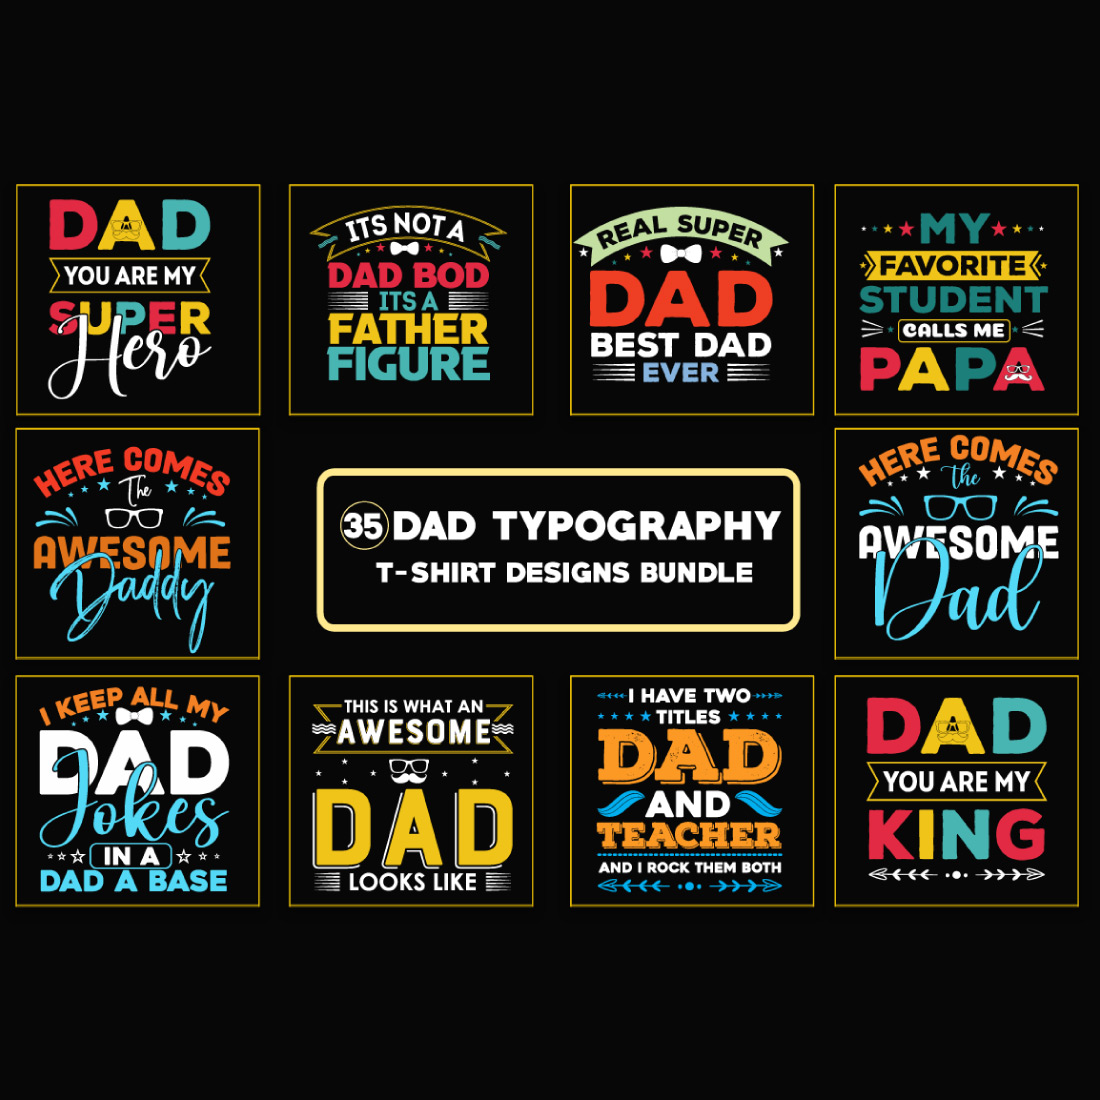 Dad Typography T-Shirt Designs Bundle cover image.